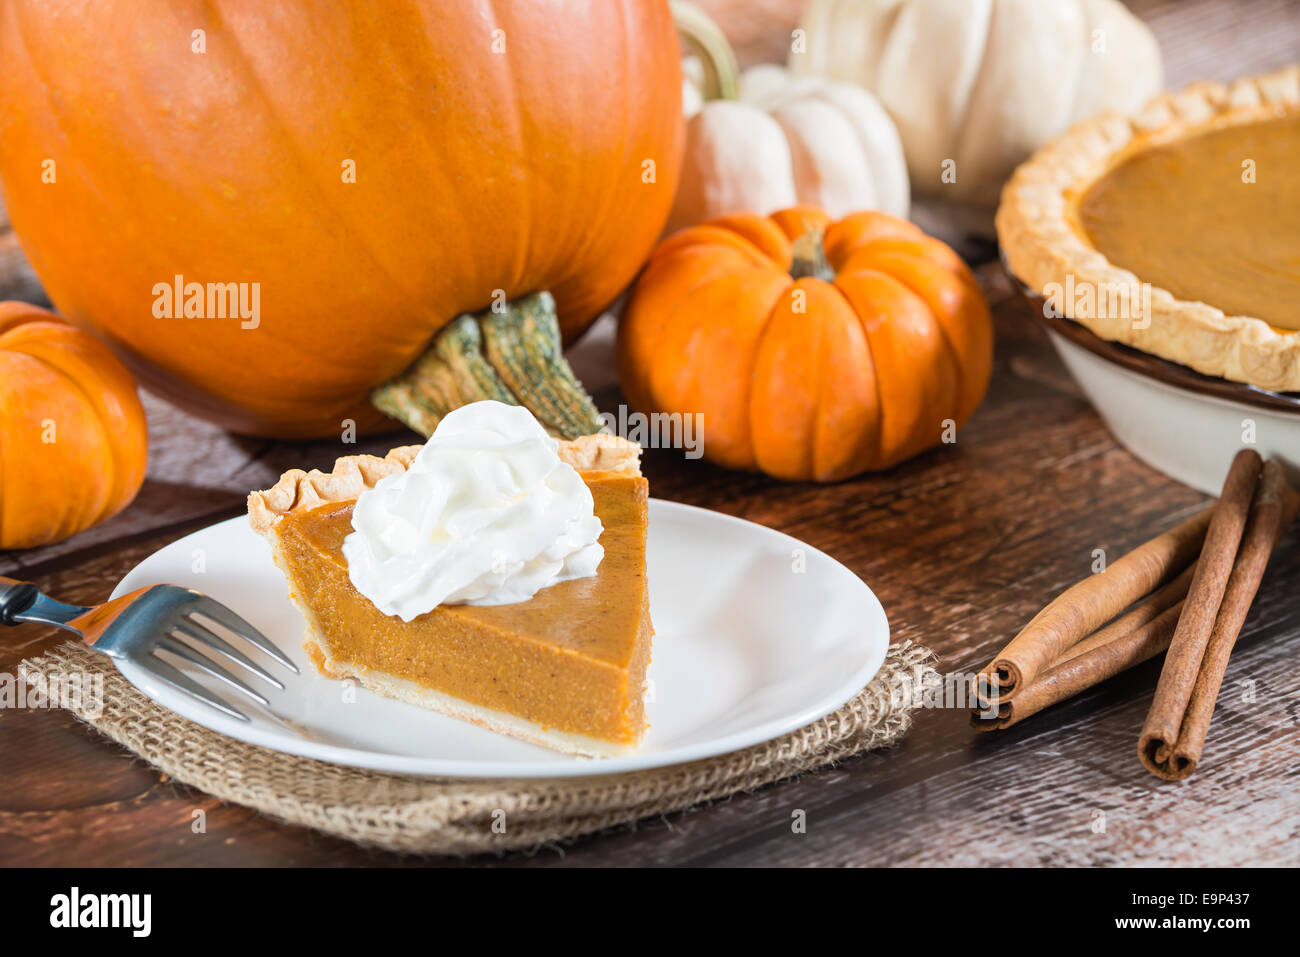 Slice of a pumpkin pie and pumpkins on wooden table Stock Photo